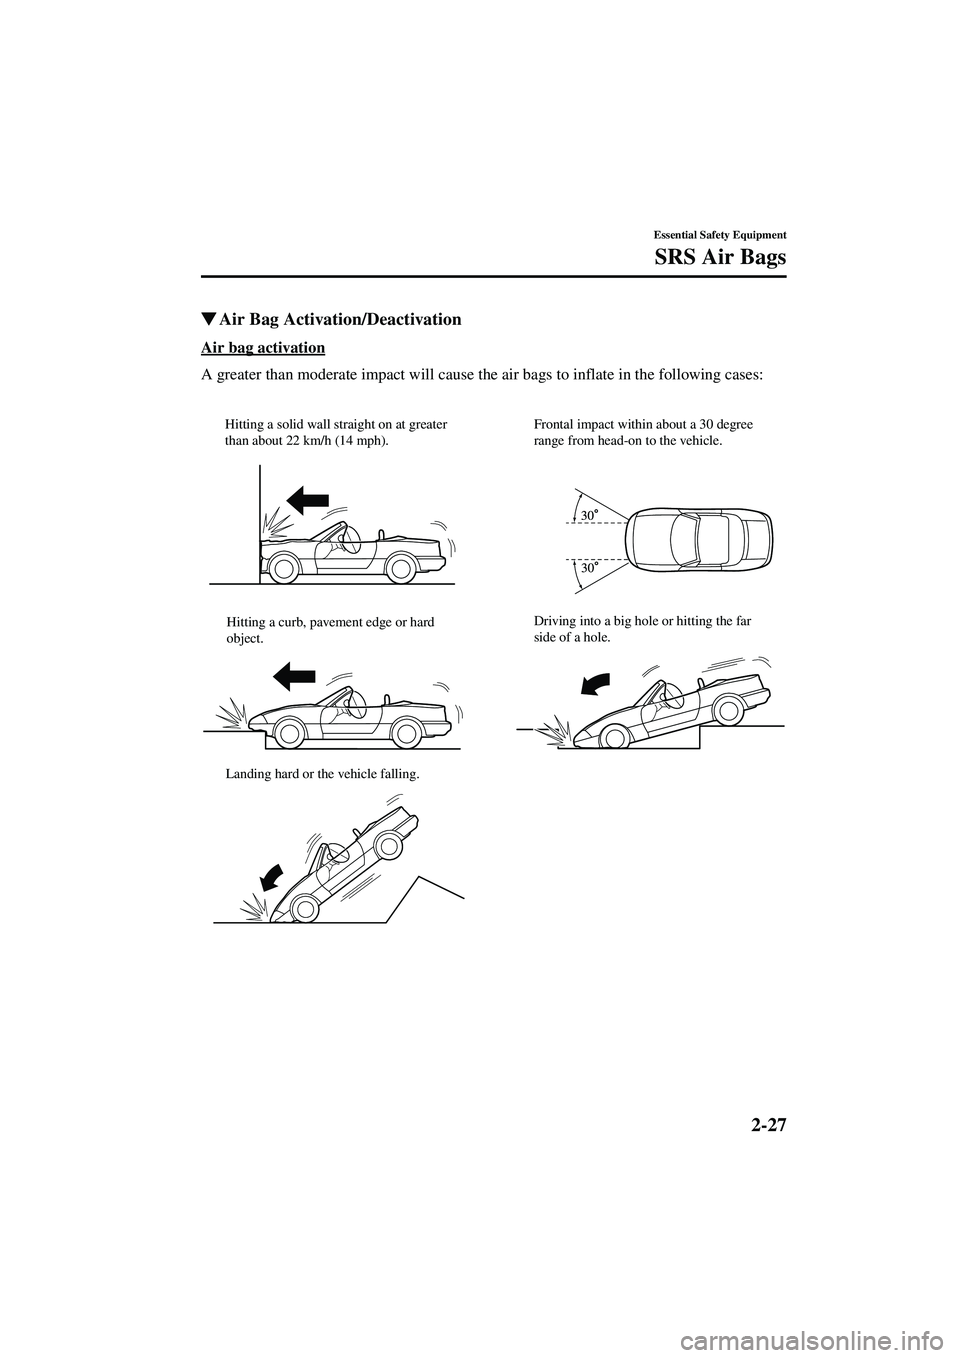 MAZDA MODEL MX-5 MIATA 2004 Owners Guide 2-27
Essential Safety Equipment
SRS Air Bags
Form No. 8S15-EA-03G
Air Bag Activation/Deactivation
Air bag activation
A greater than moderate impact will cause the air bags to inflate in the following